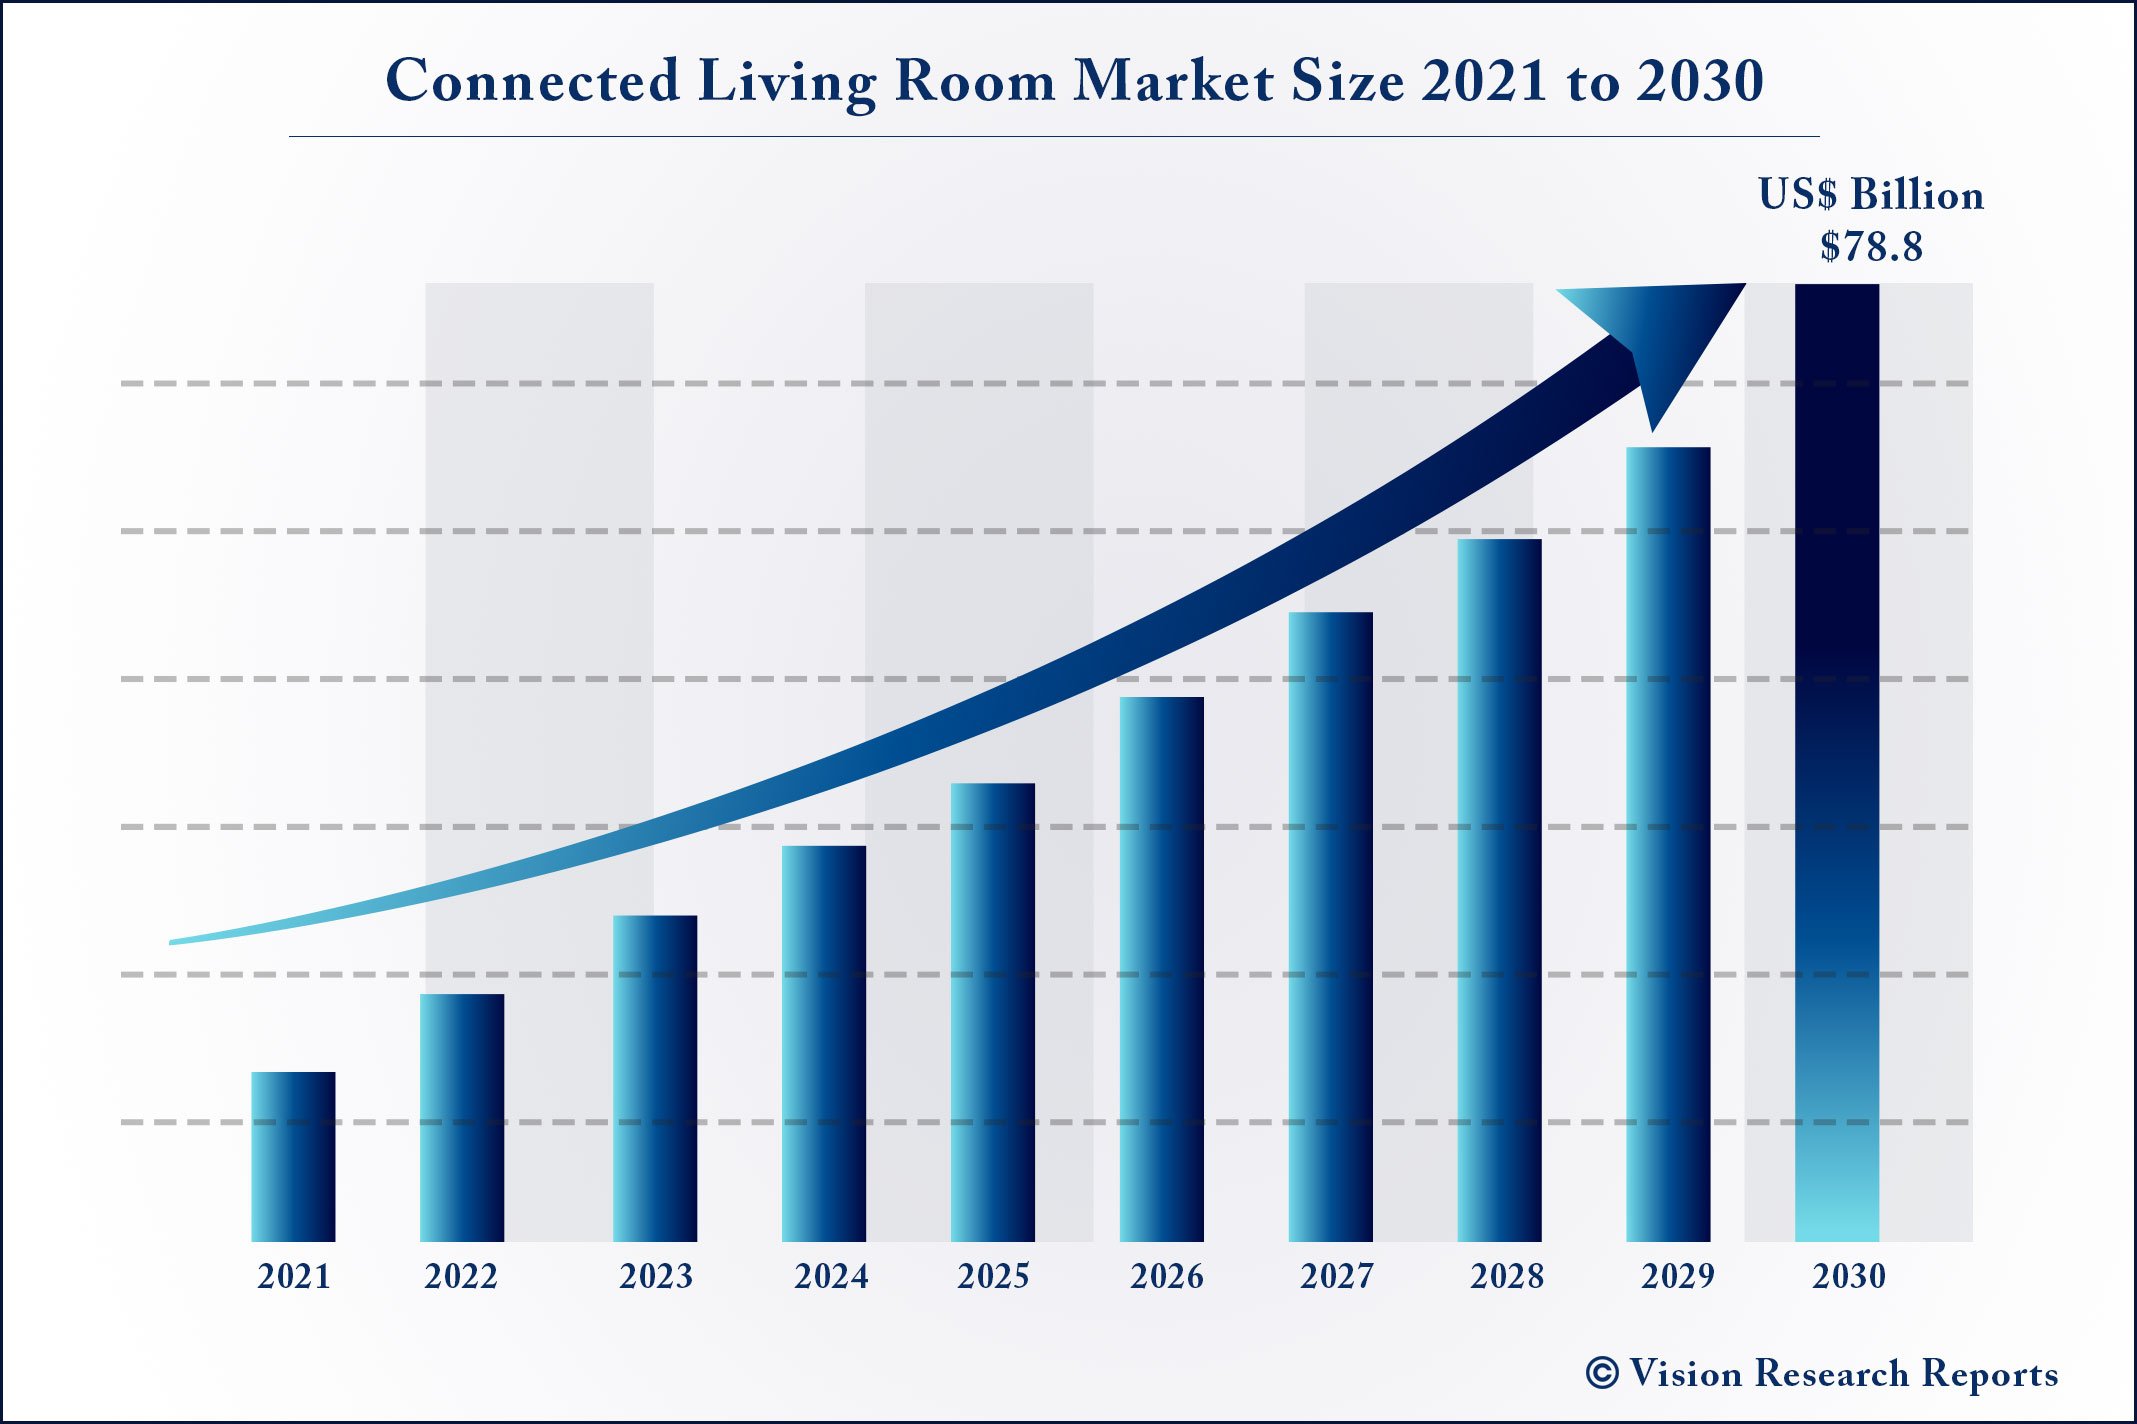 Connected Living Room Market Size 2021 to 2030